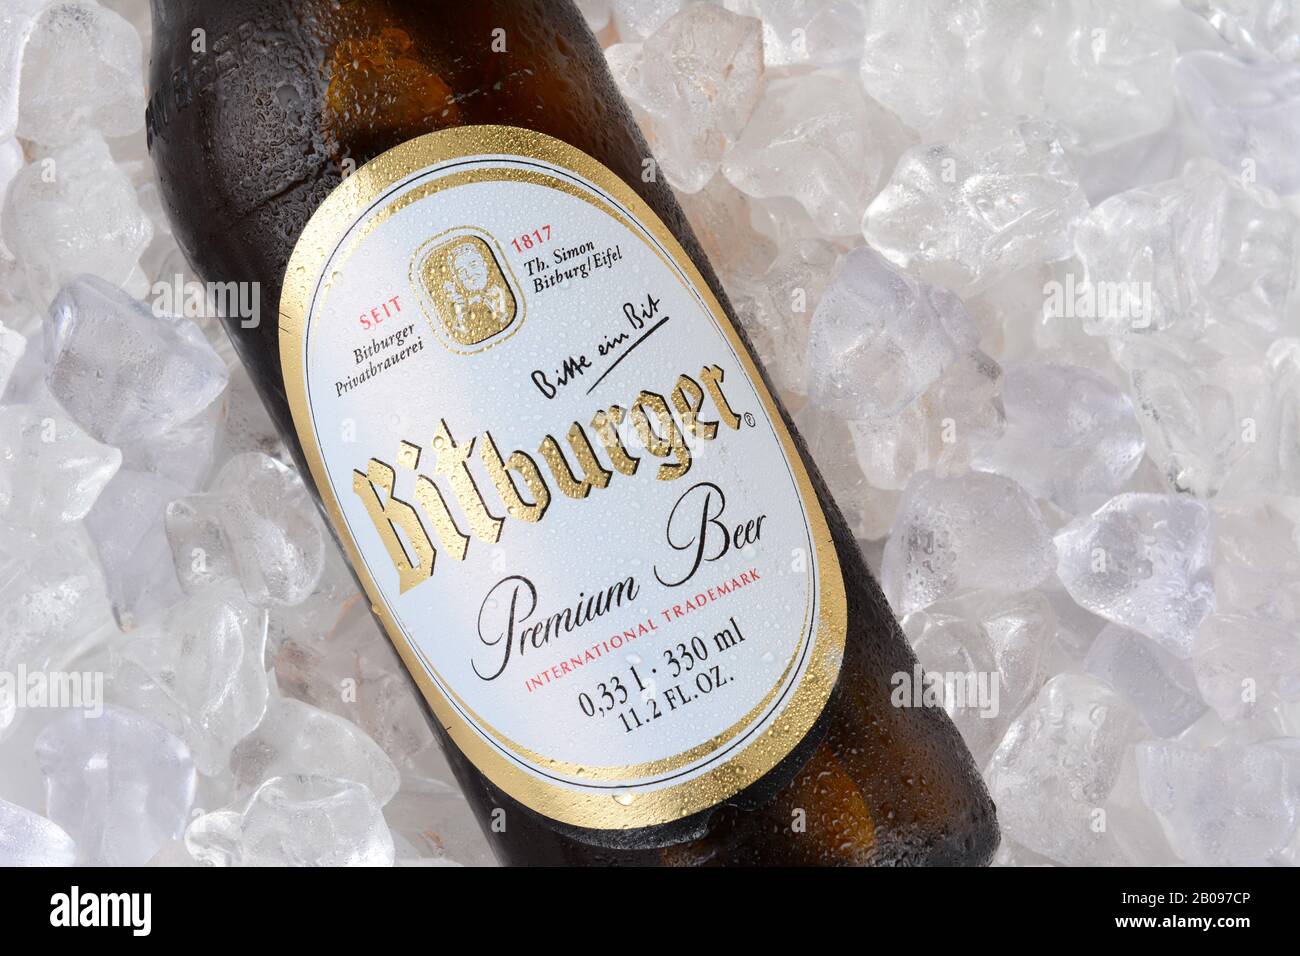 IRVINE, CA - JANUARY 11, 2015: A closeup of a bottle of Bitburger Beer on a bed of ice. Bitburger is a German family business with around  that in 201 Stock Photo